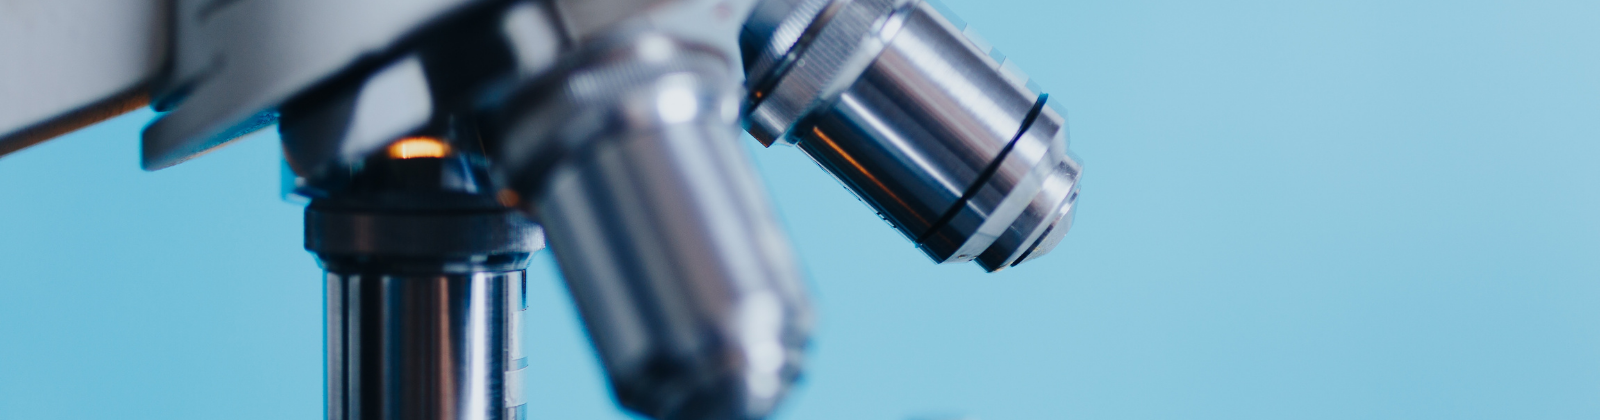 Microscope for research on a blue background